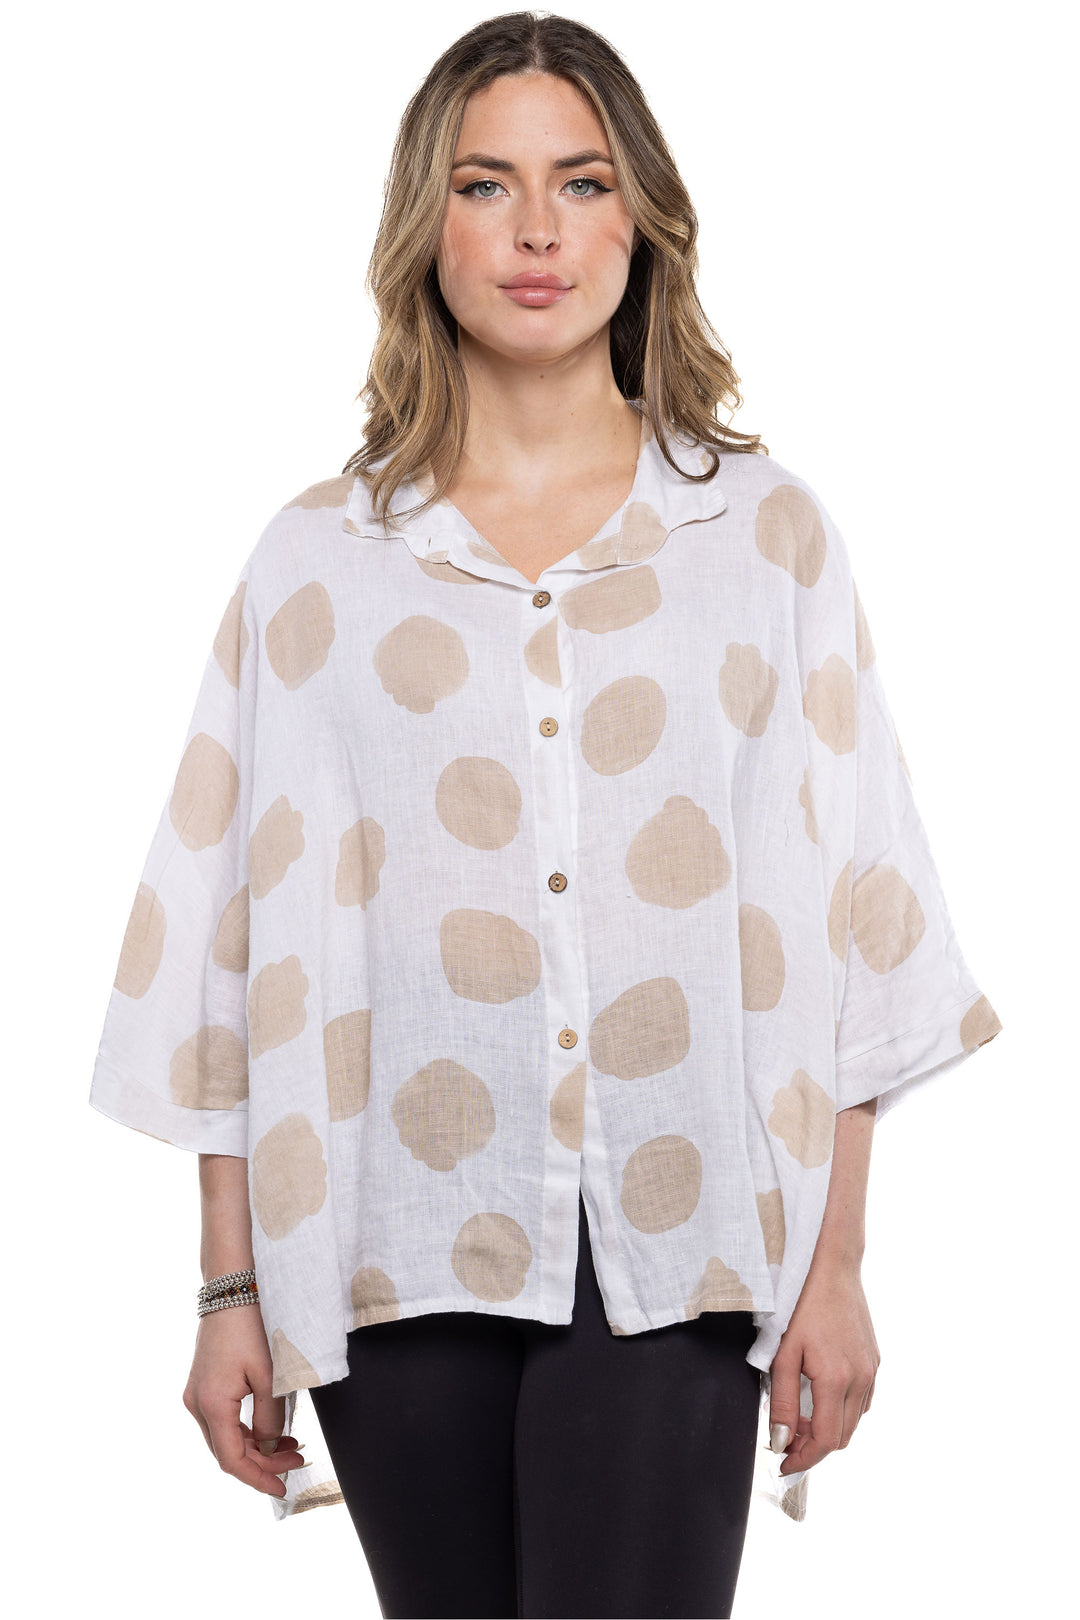 Etern Elle Summer 2024 The classic collar and full front buttons add a touch of sophistication, while the dolman sleeves and playful polka dot print make it a versatile piece for any occasion.